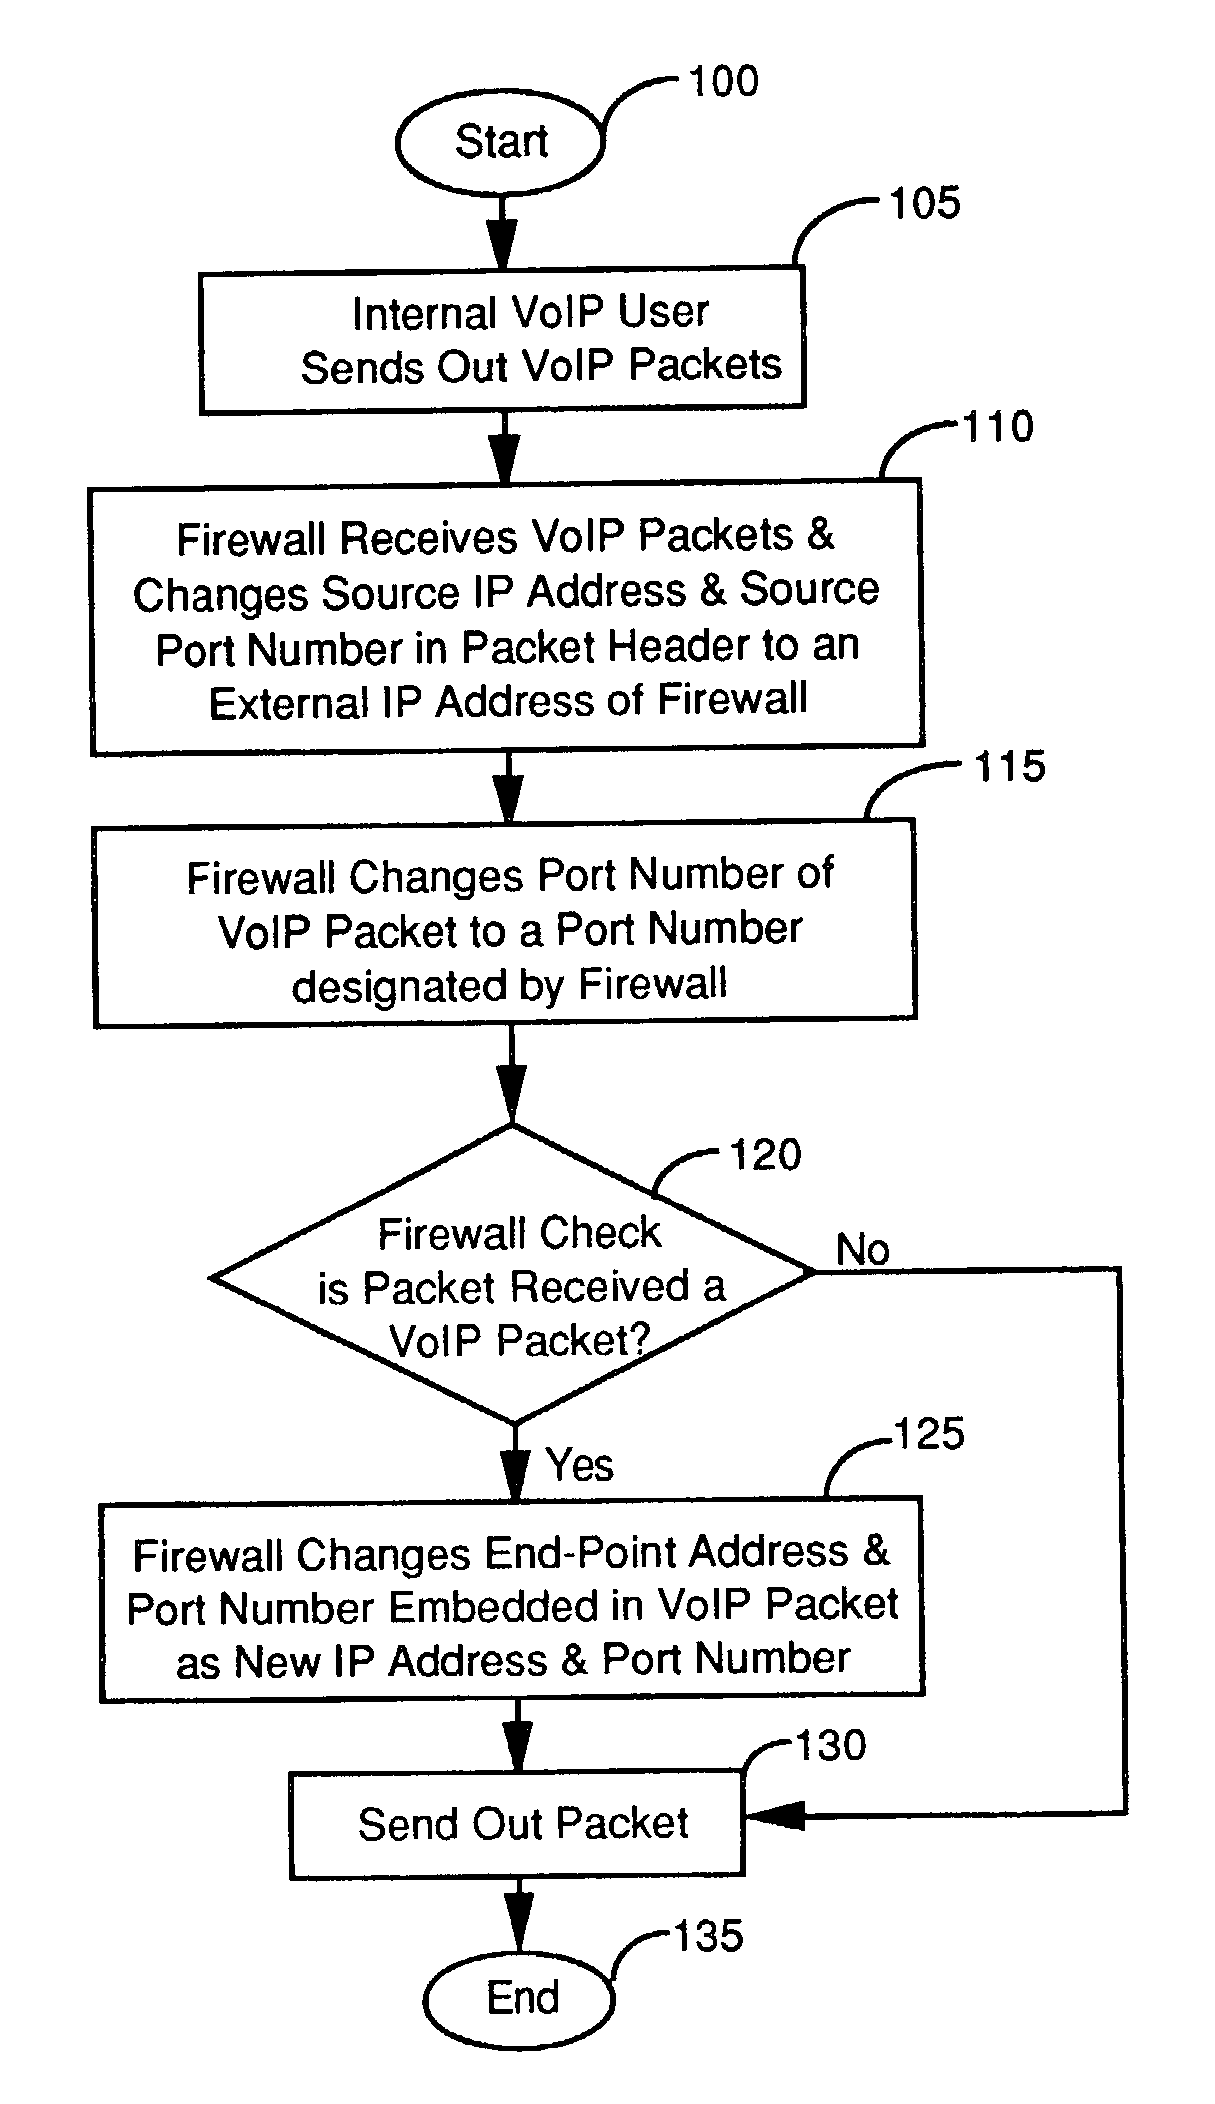 Firewall interface configuration and processes to enable bi-directional VoIP traversal communications